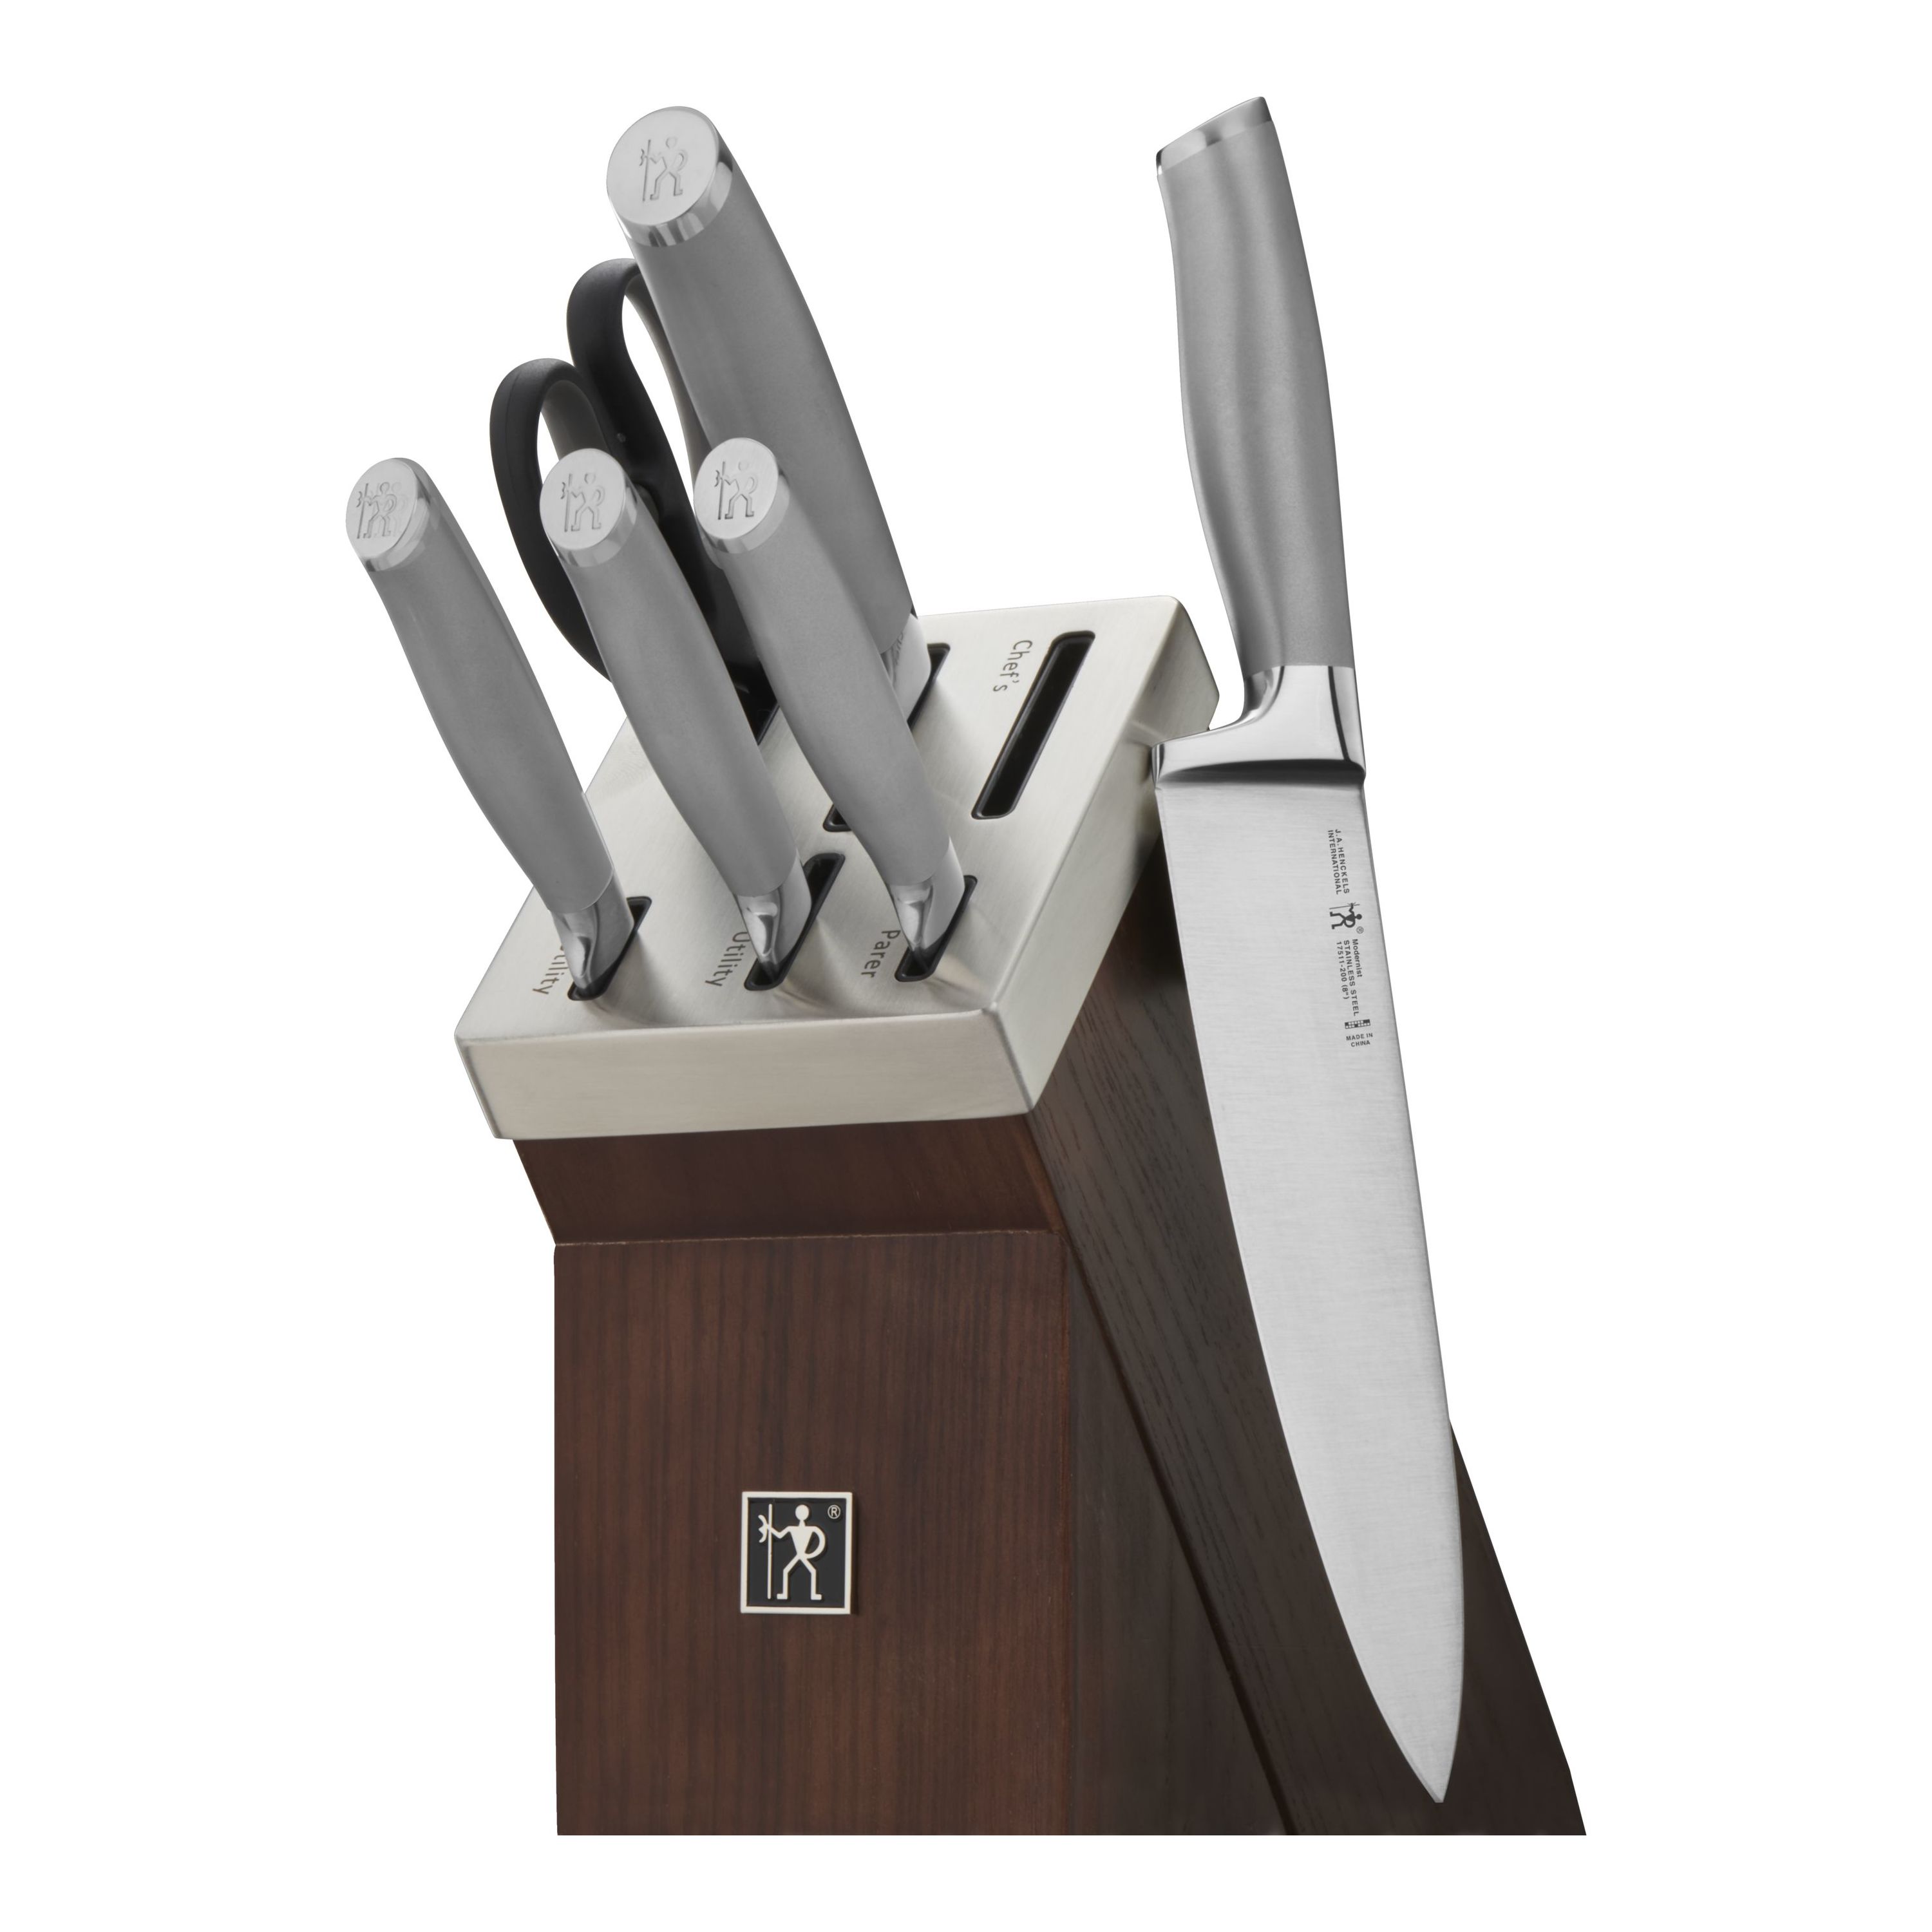 https://www.zwilling.com/on/demandware.static/-/Sites-zwilling-master-catalog/default/dwf62a387f/images/large/17503-007_1.jpg